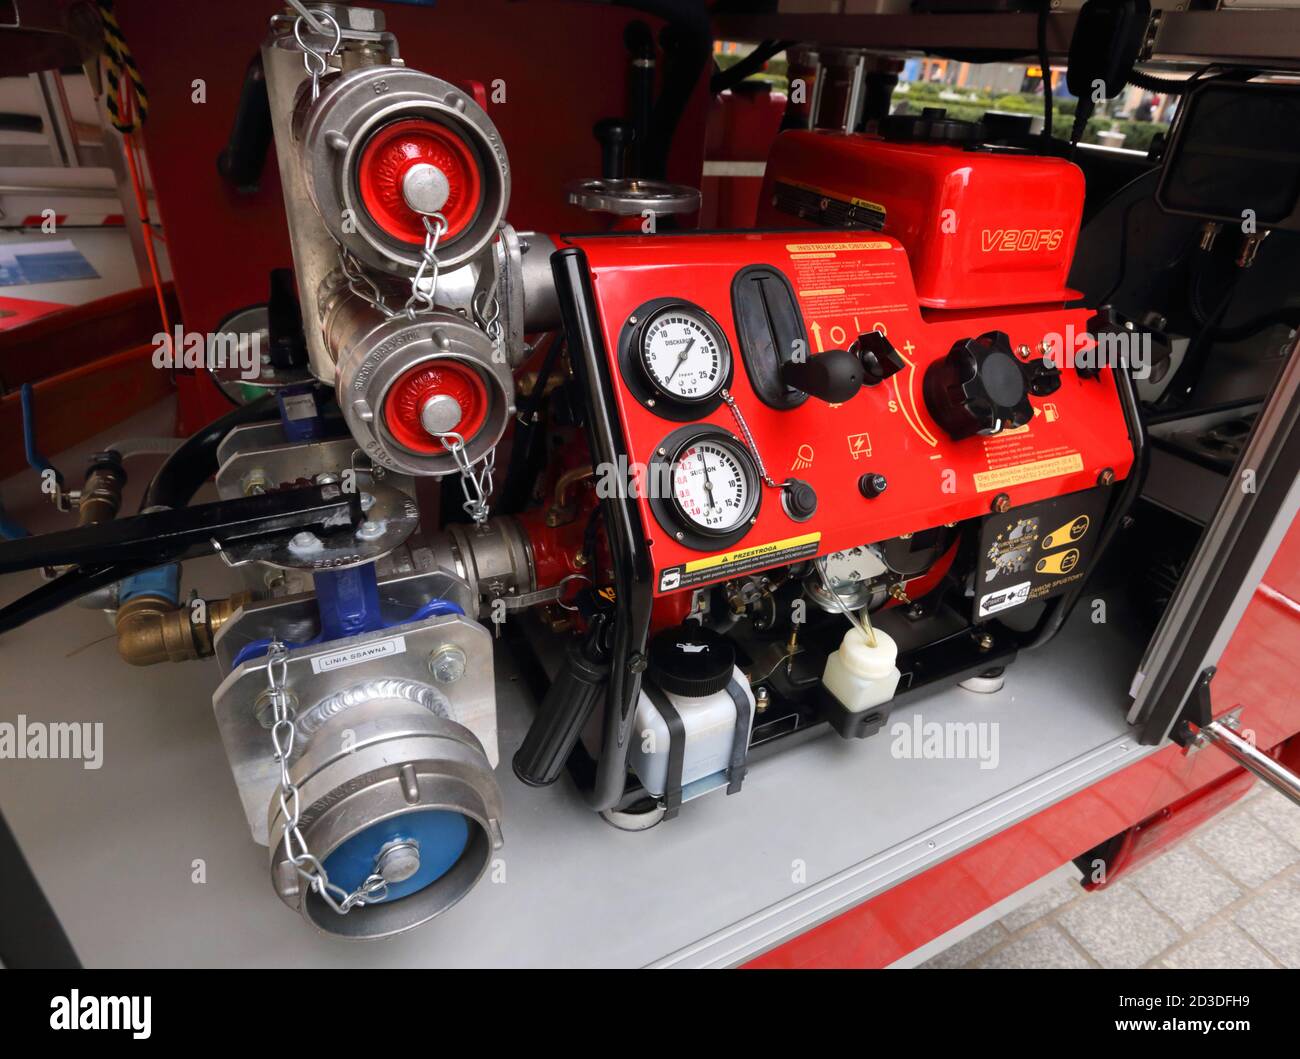 Cracow. Krakow. Poland. Fire engine water pump in the fire truck storage compartment. Stock Photo